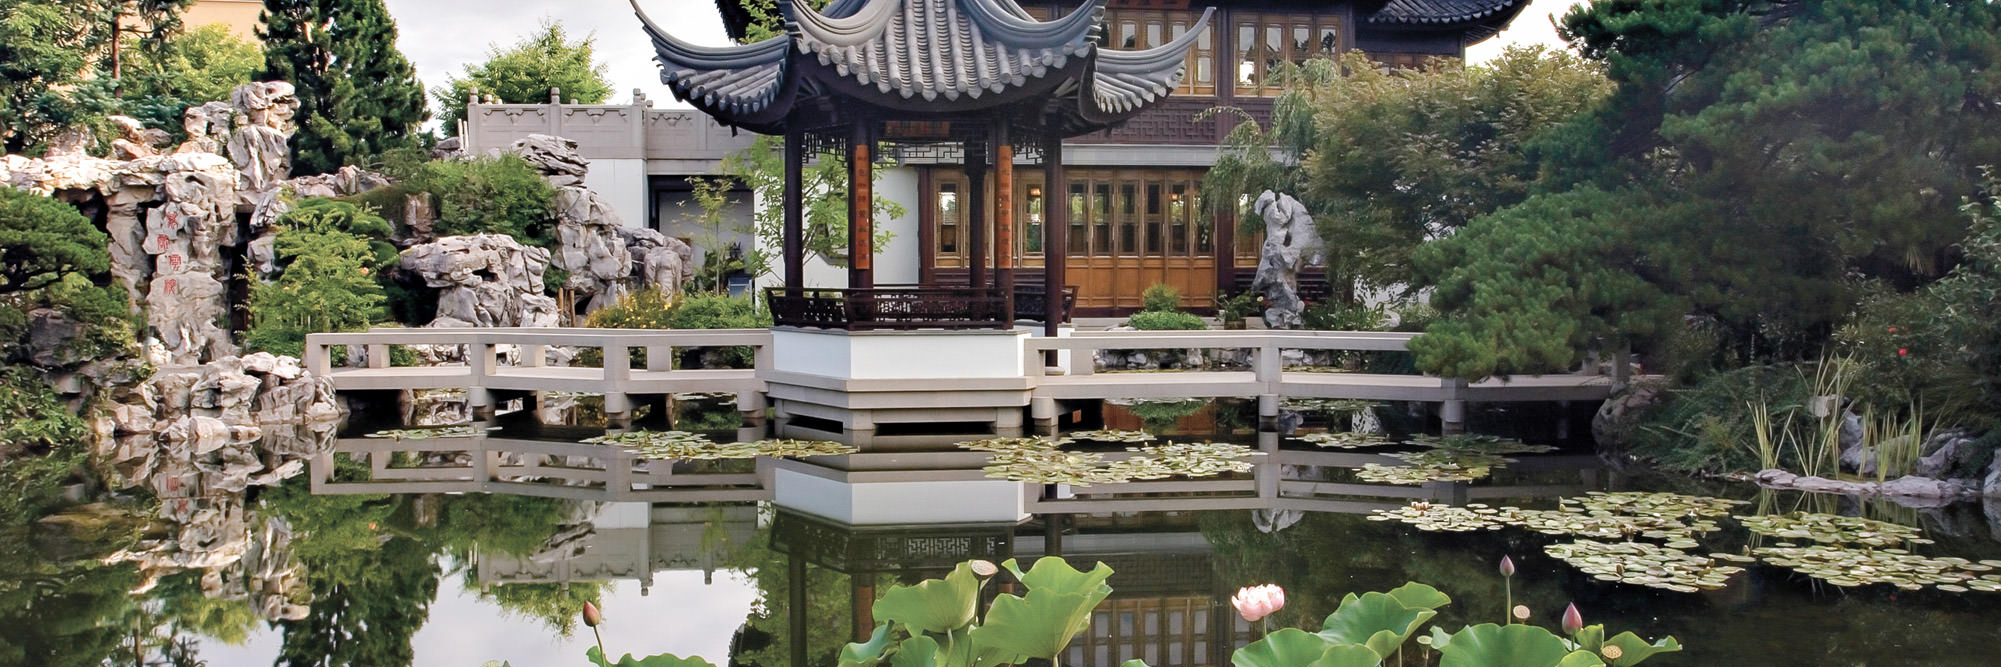 A view of the lake and gardens at Lan Su Chinese Garden